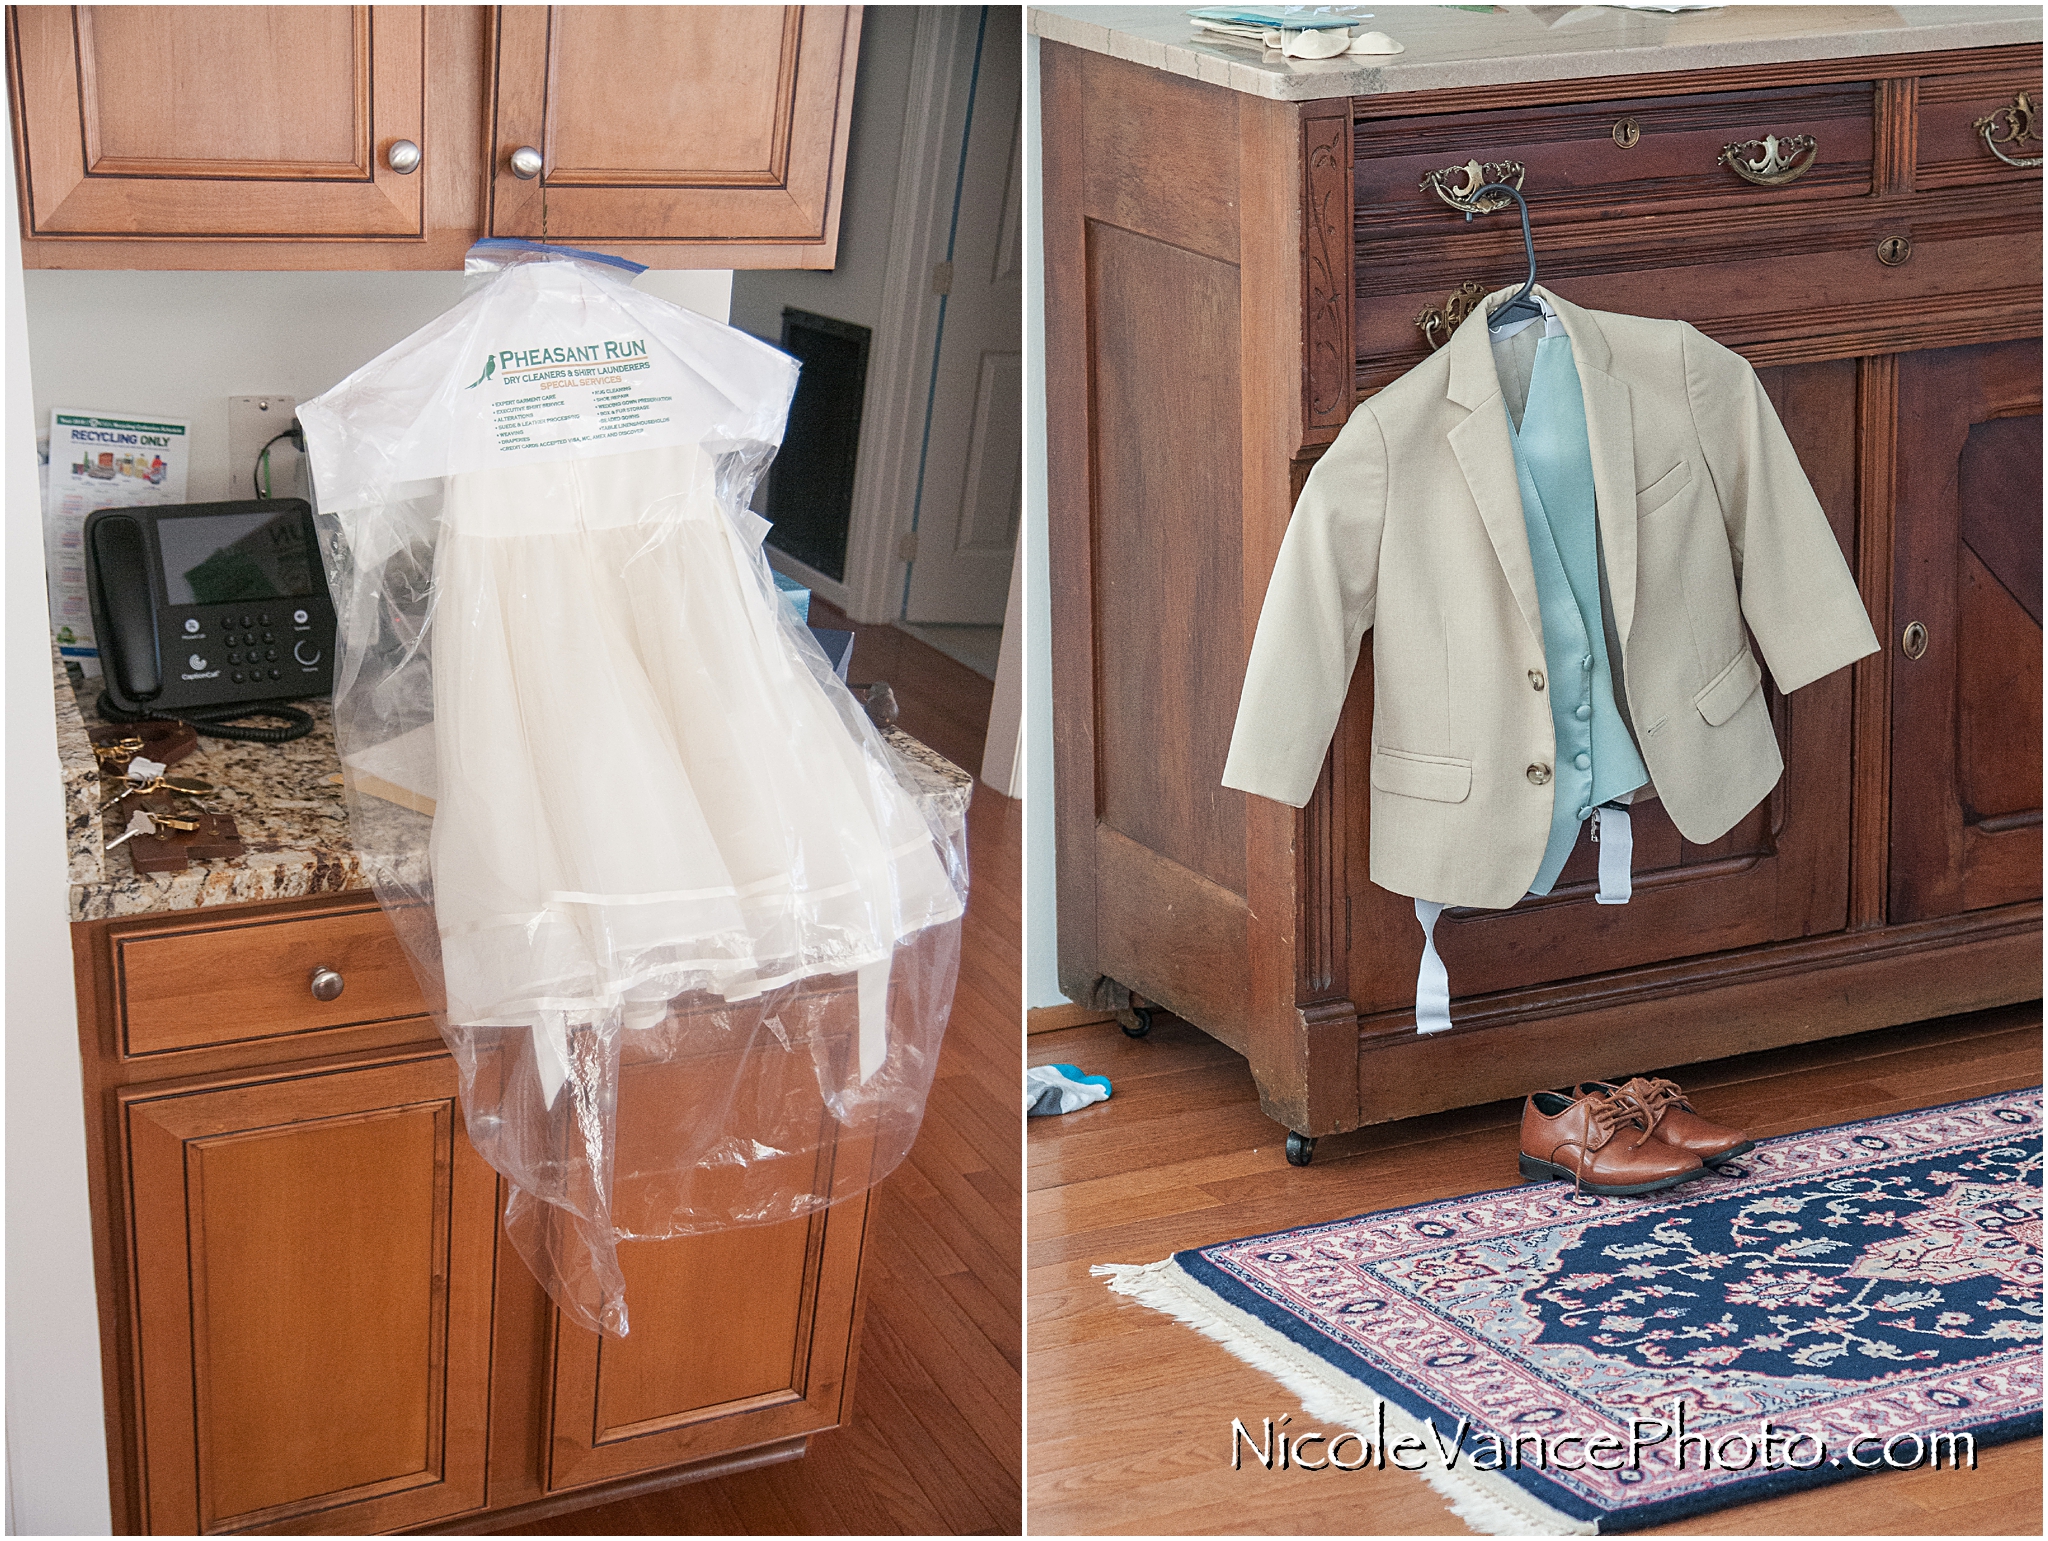 The children's clothes lie in wait until the last minute so they can look perfect for the wedding.